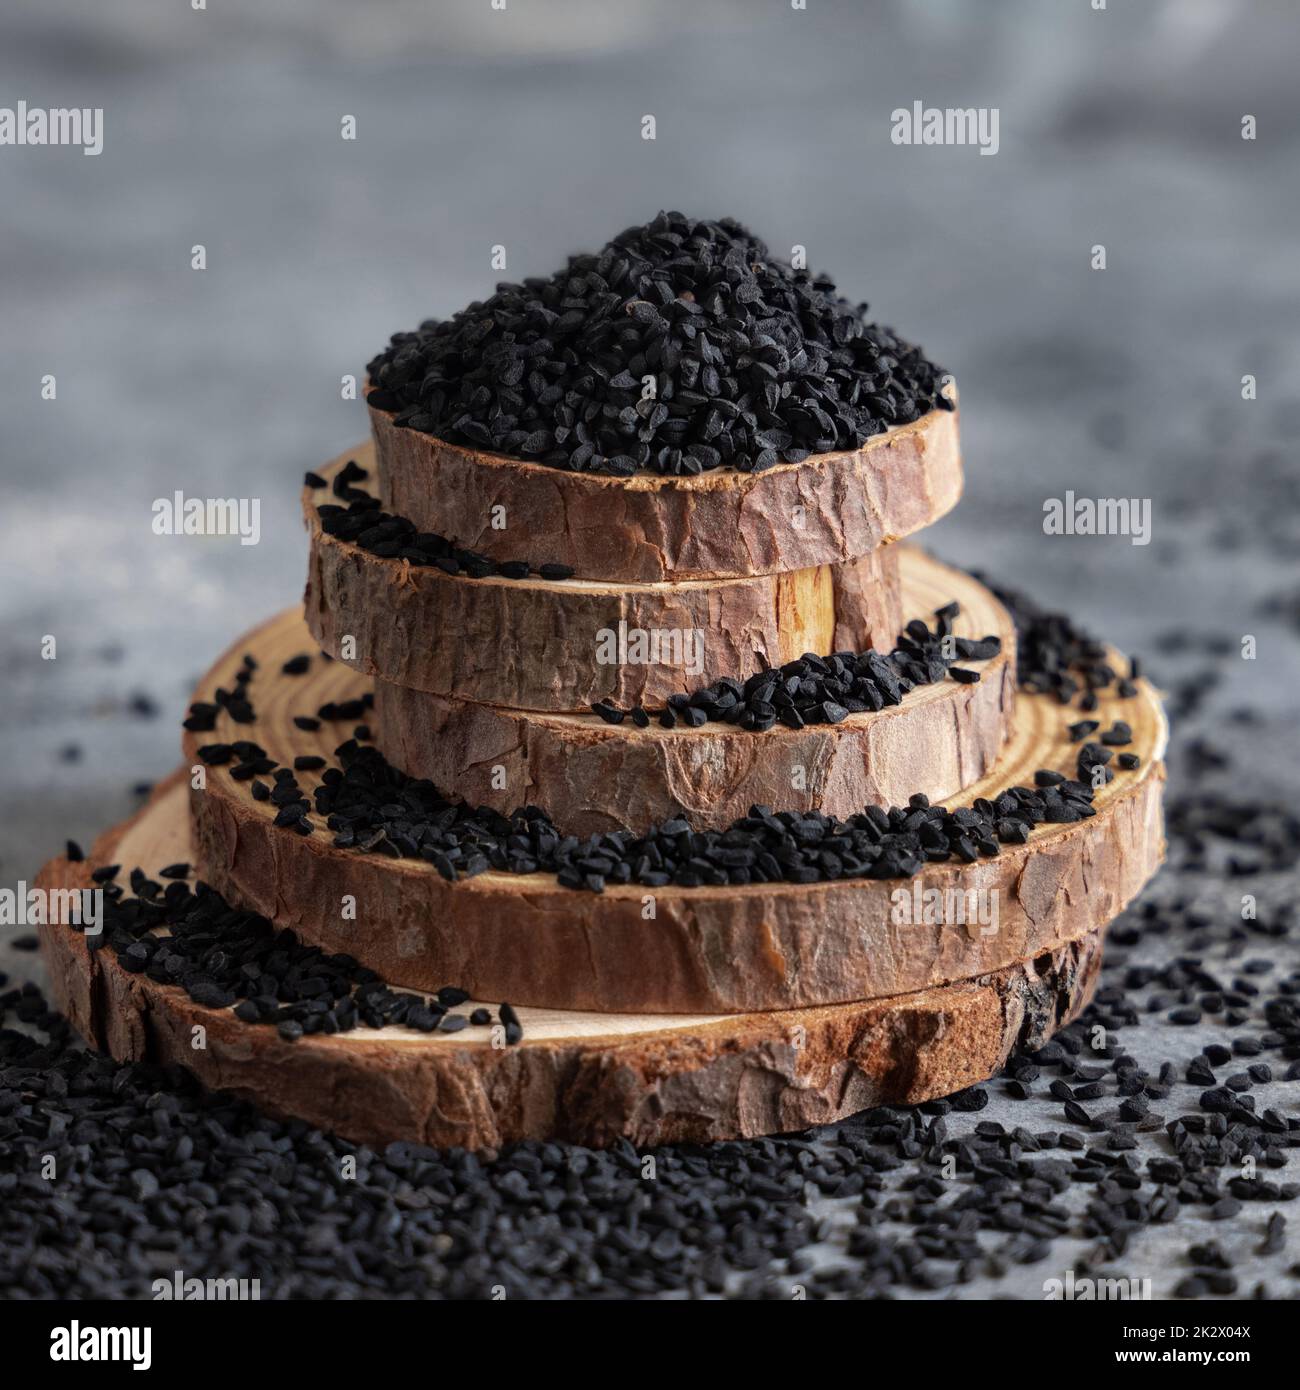 Indian spice Black cumin (nigella sativa or kalonji) seeds close up with a wooden spoon Stock Photo